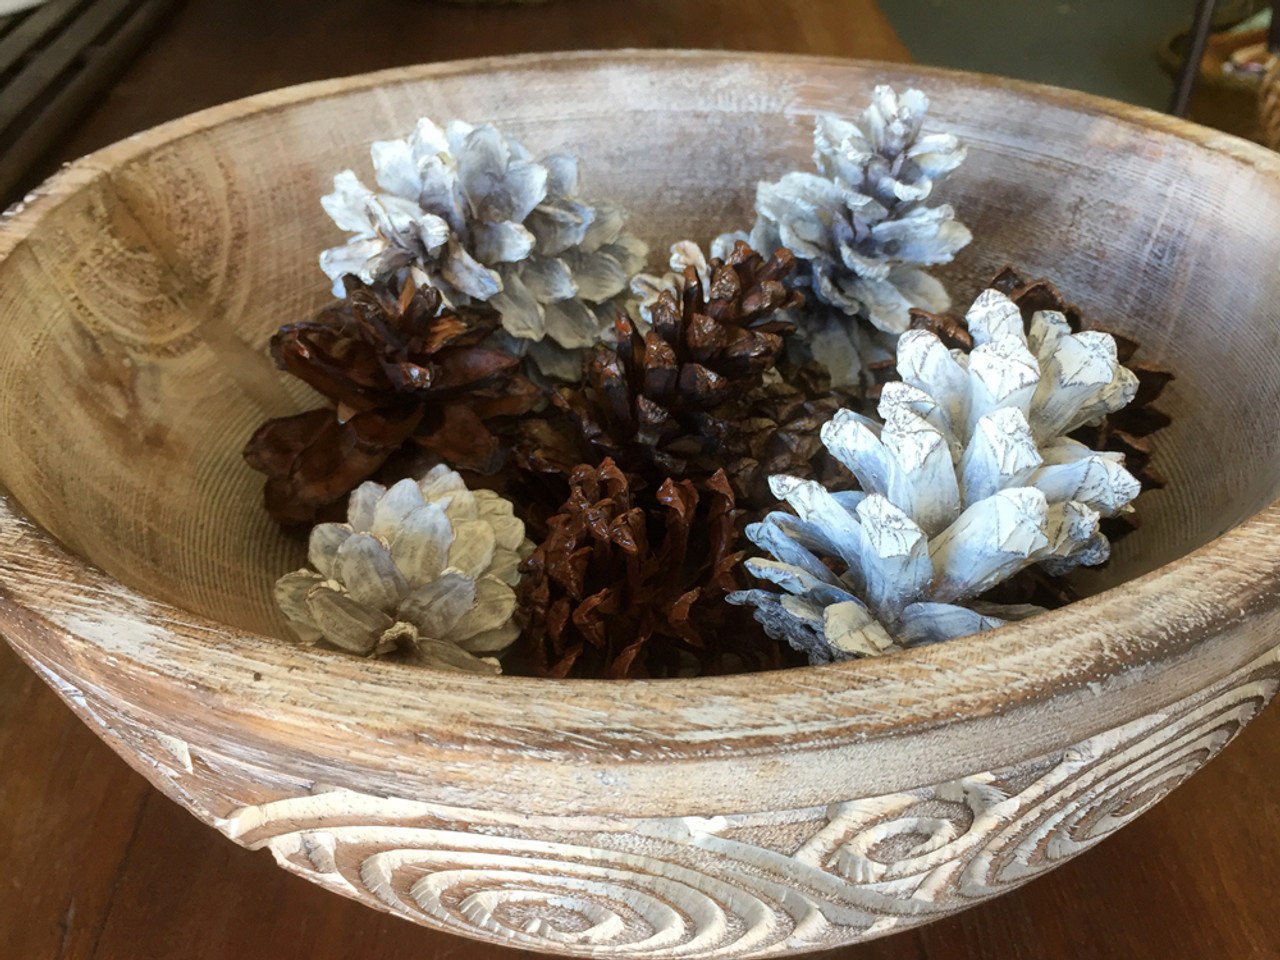 Christmas table decor decorative natural brown pine cones
Also comes in white sku 50266